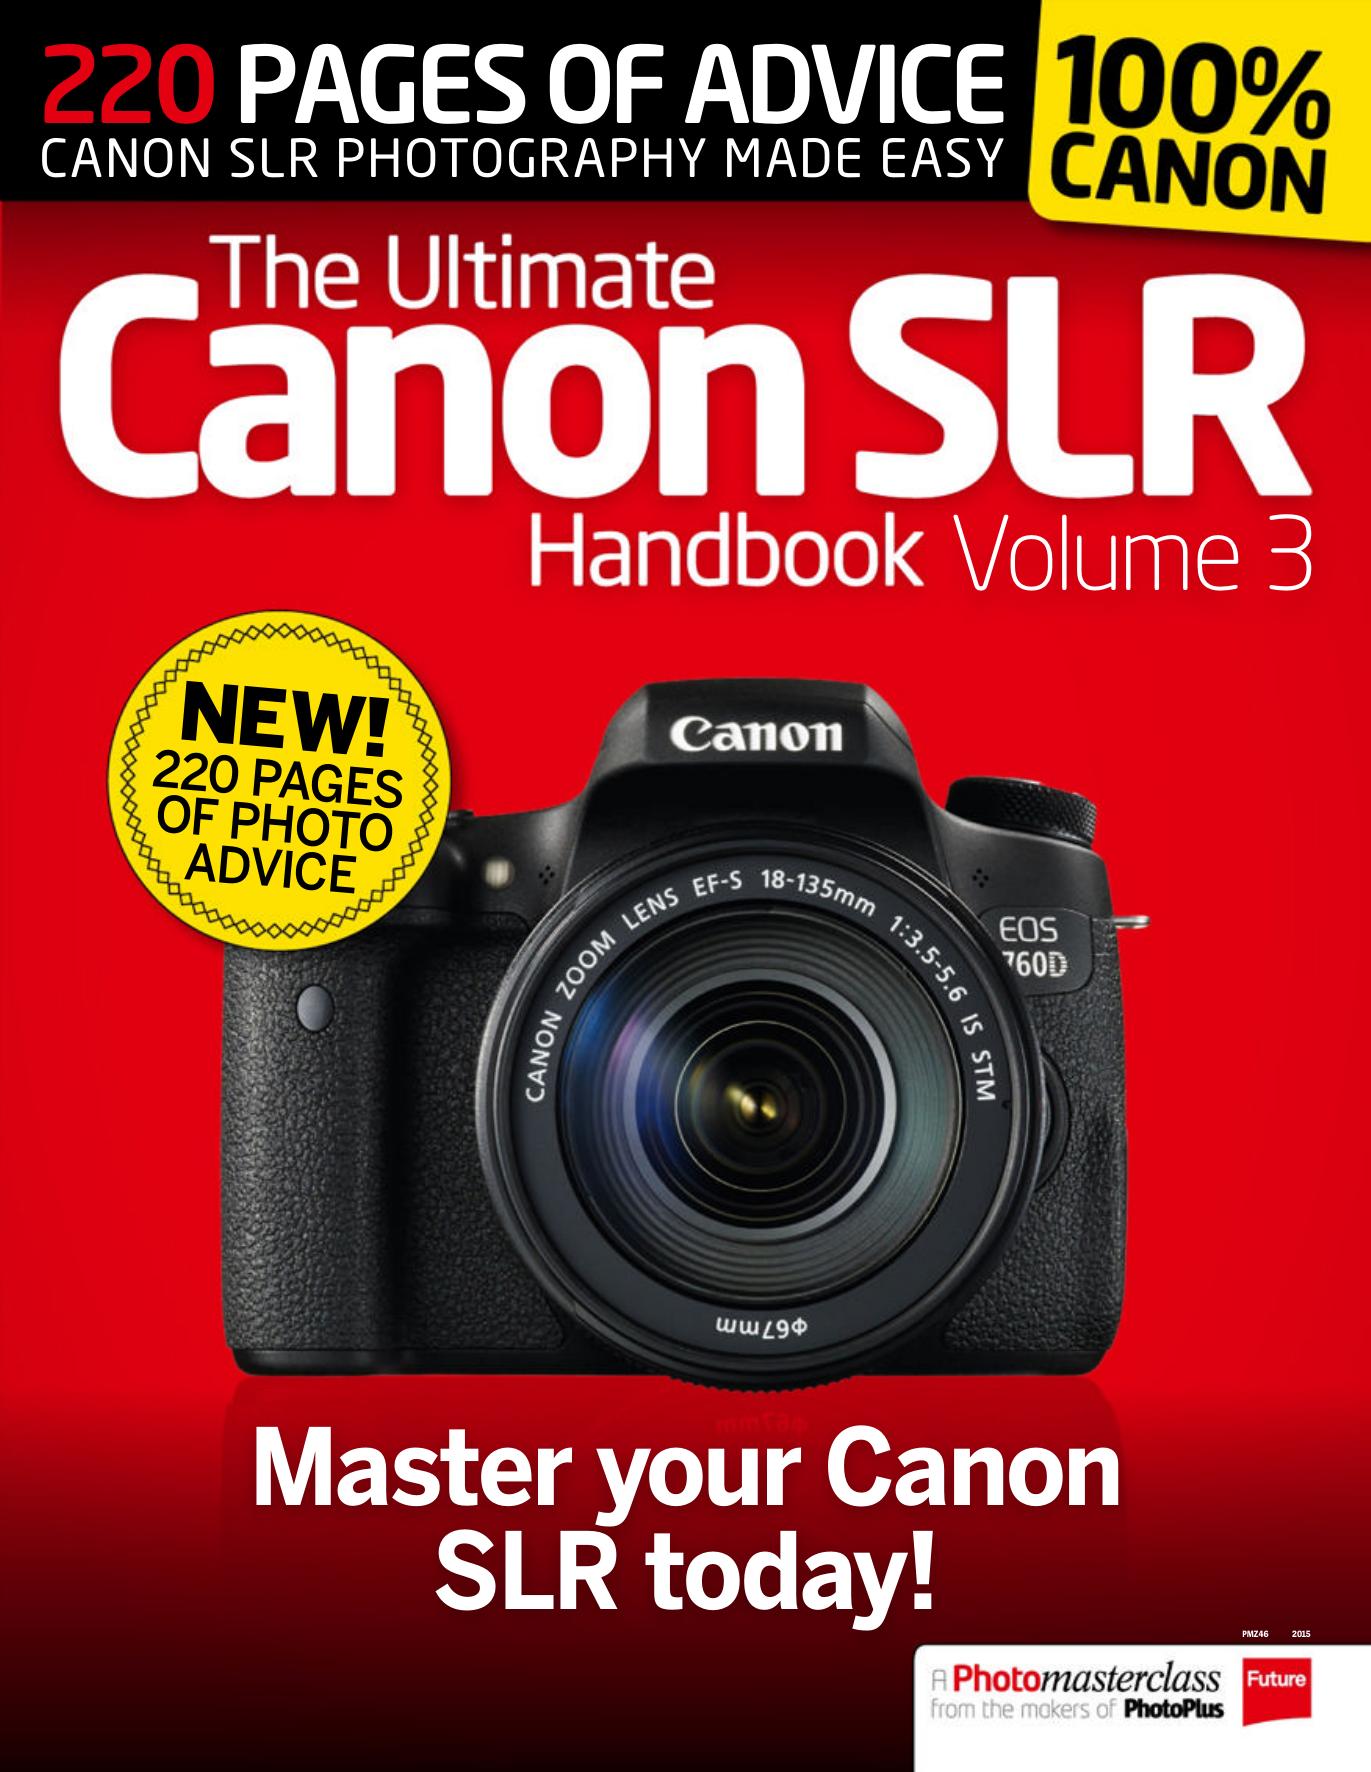 The Ultimate Canon SLR Handbook, Volume 3 by Master your Canon SLR Today